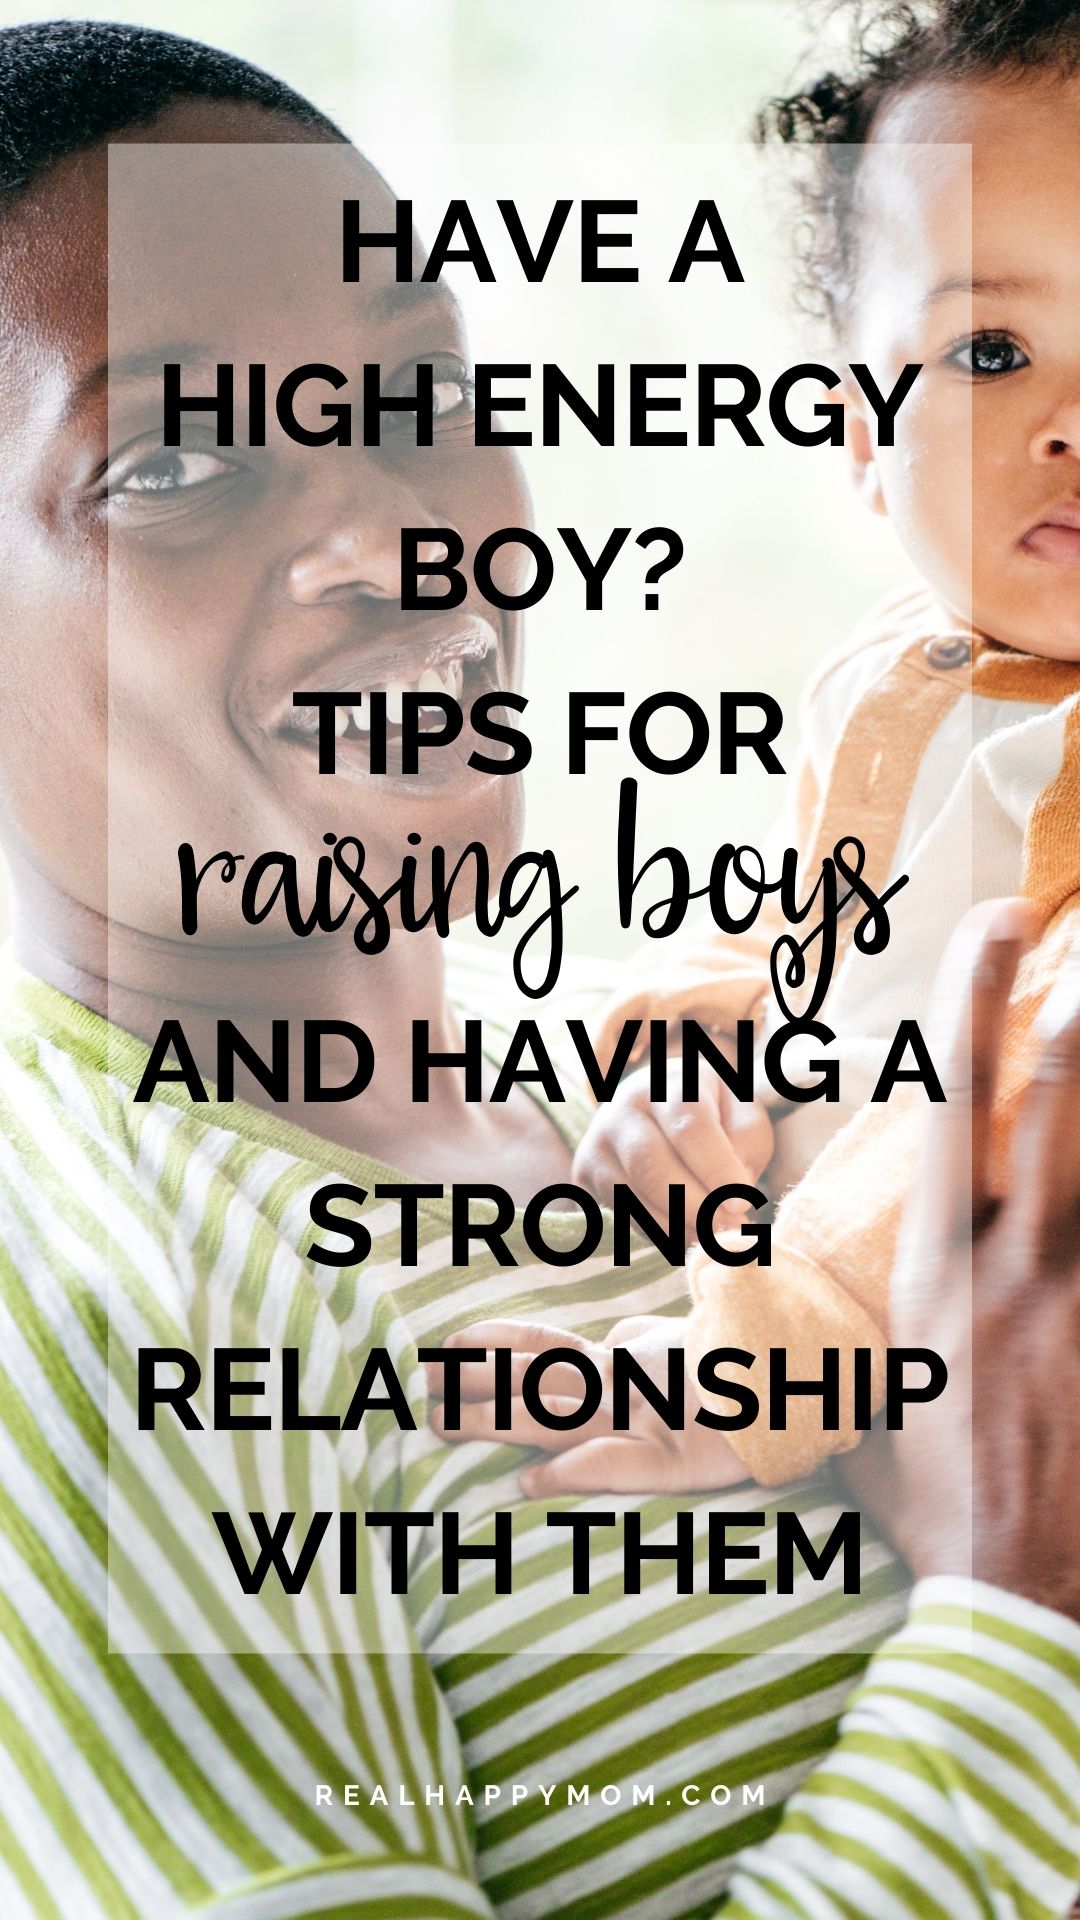 Have a High Energy Boy? Tips for Raising Boys and Having a Strong Relationship with Them